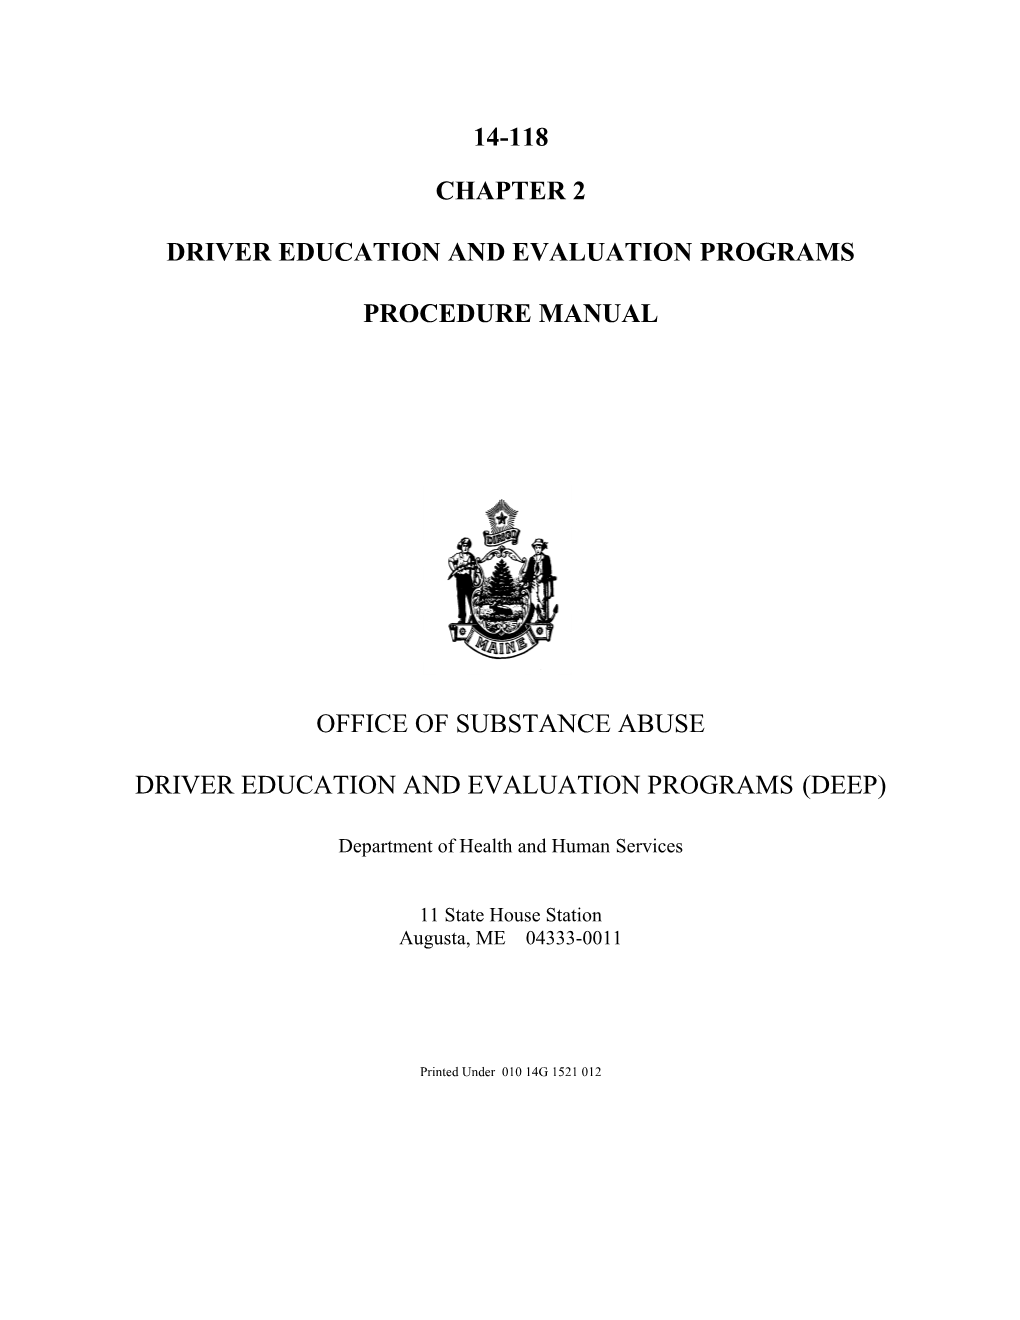 Driver Education and Evaluation Programs